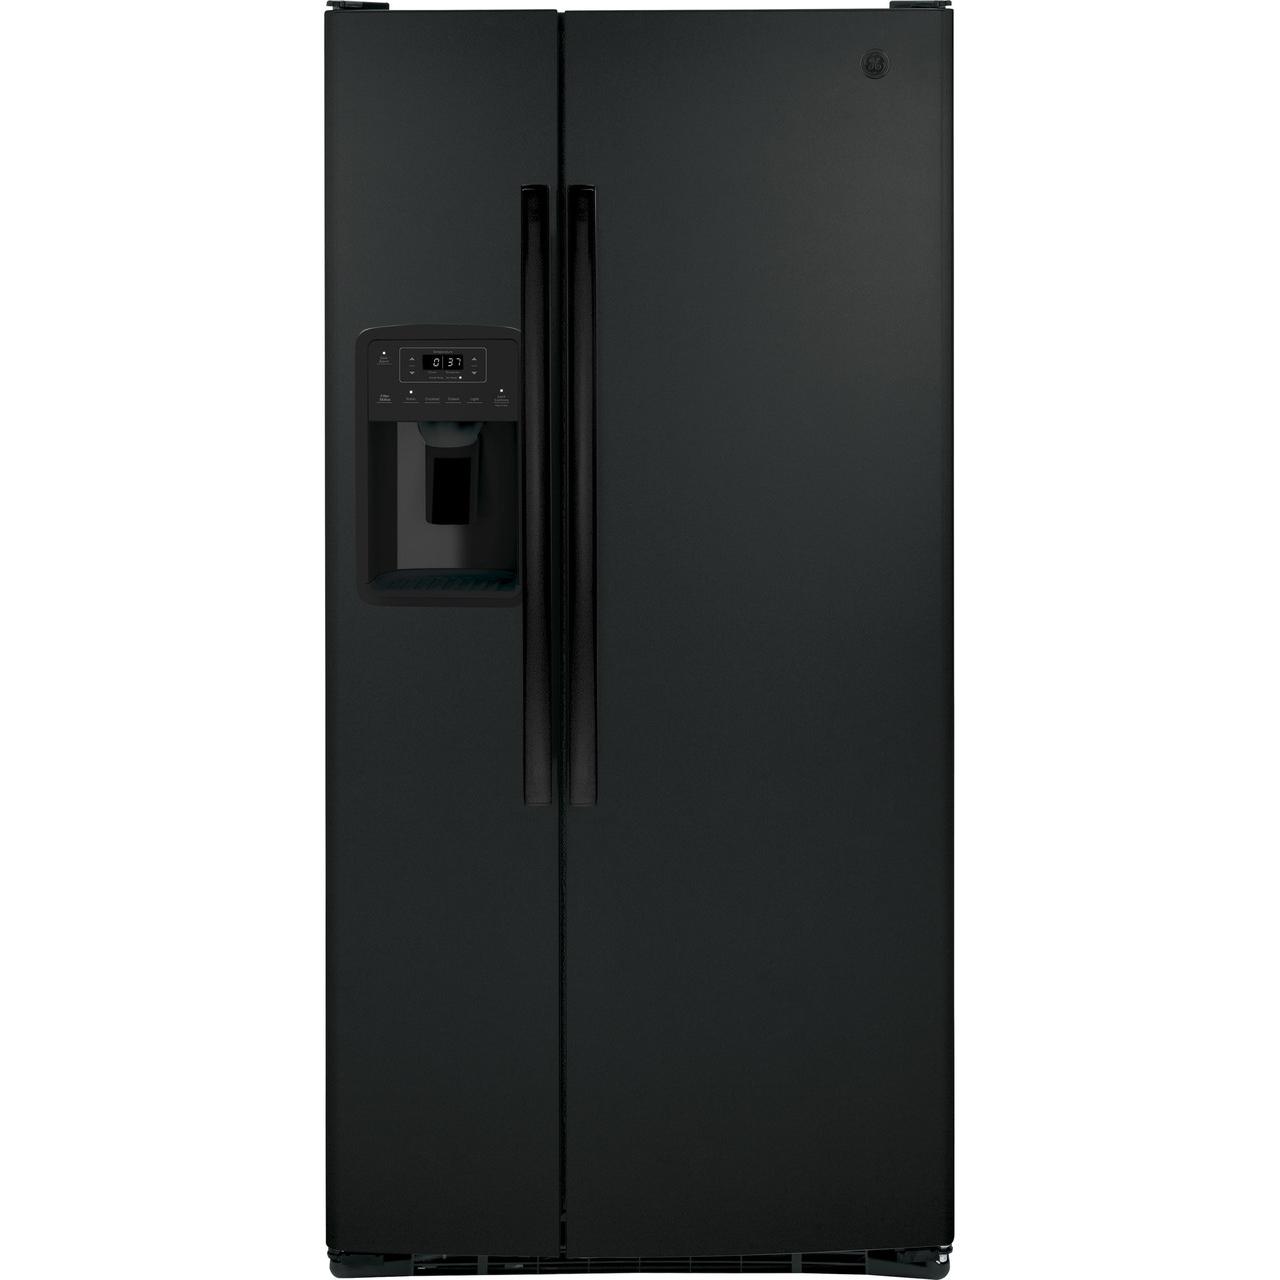 GE 33-inch, 23 cu. ft. Side-By-Side Refrigerator with Water and Ice Dispensing System GSS23GGPBB